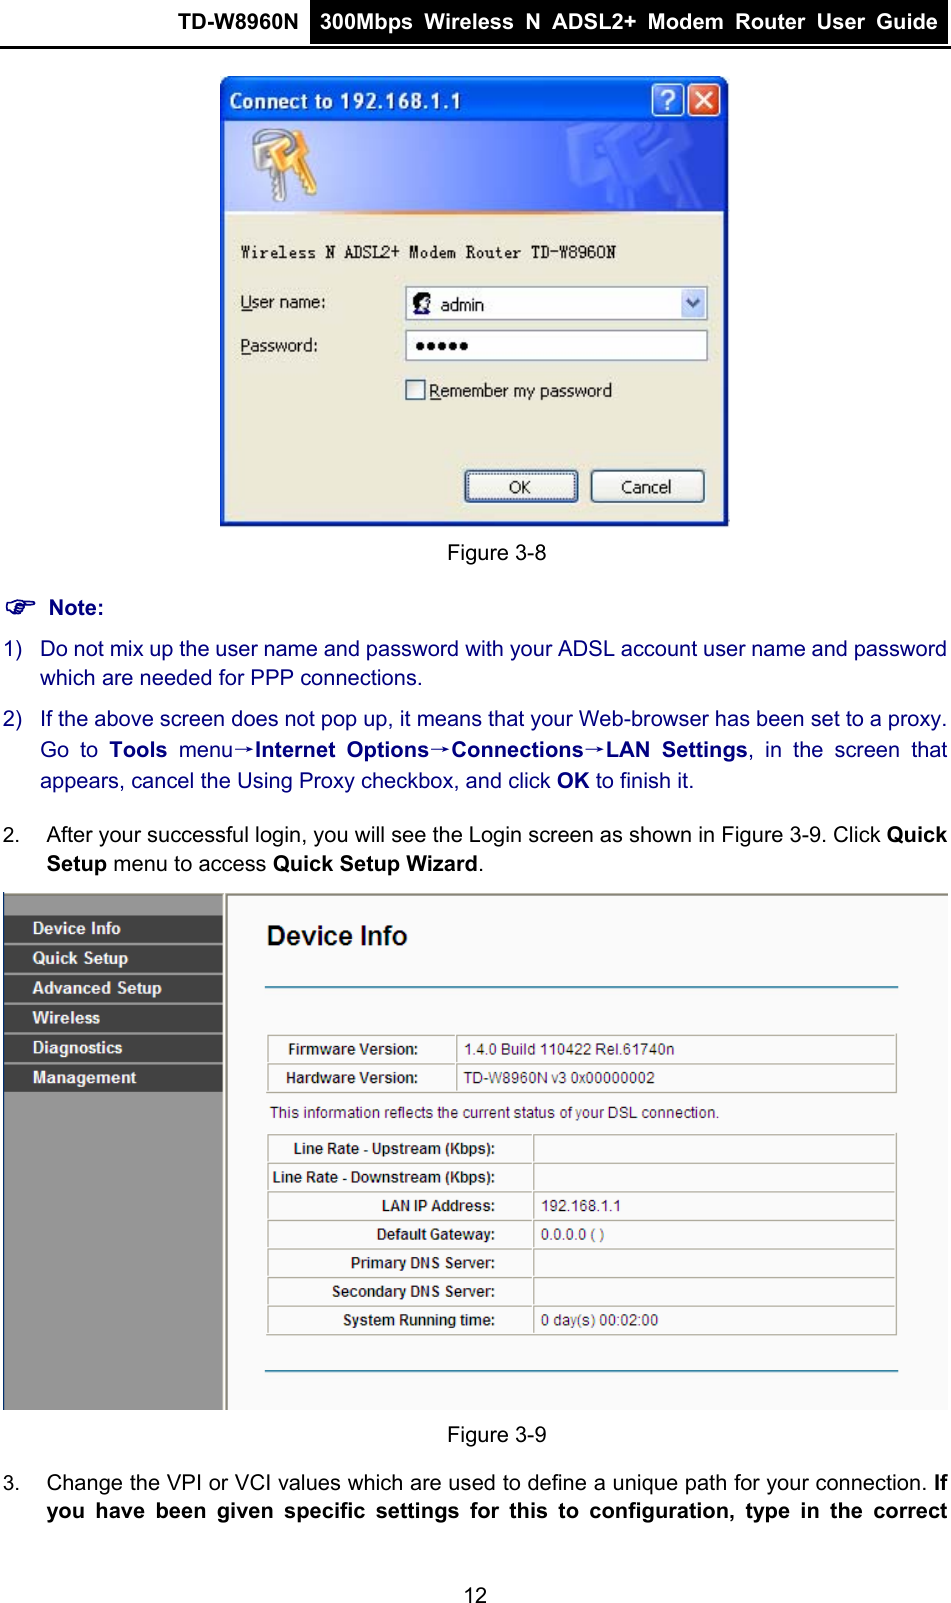 TD-W8960N  300Mbps Wireless N ADSL2+ Modem Router User Guide   Figure 3-8 ) Note: 1)  Do not mix up the user name and password with your ADSL account user name and password which are needed for PPP connections. 2)  If the above screen does not pop up, it means that your Web-browser has been set to a proxy. Go to Tools menu→Internet Options→Connections→LAN Settings, in the screen that appears, cancel the Using Proxy checkbox, and click OK to finish it. 2.  After your successful login, you will see the Login screen as shown in Figure 3-9. Click Quick Setup menu to access Quick Setup Wizard.  Figure 3-9 3.  Change the VPI or VCI values which are used to define a unique path for your connection. If you have been given specific settings for this to configuration, type in the correct 12 